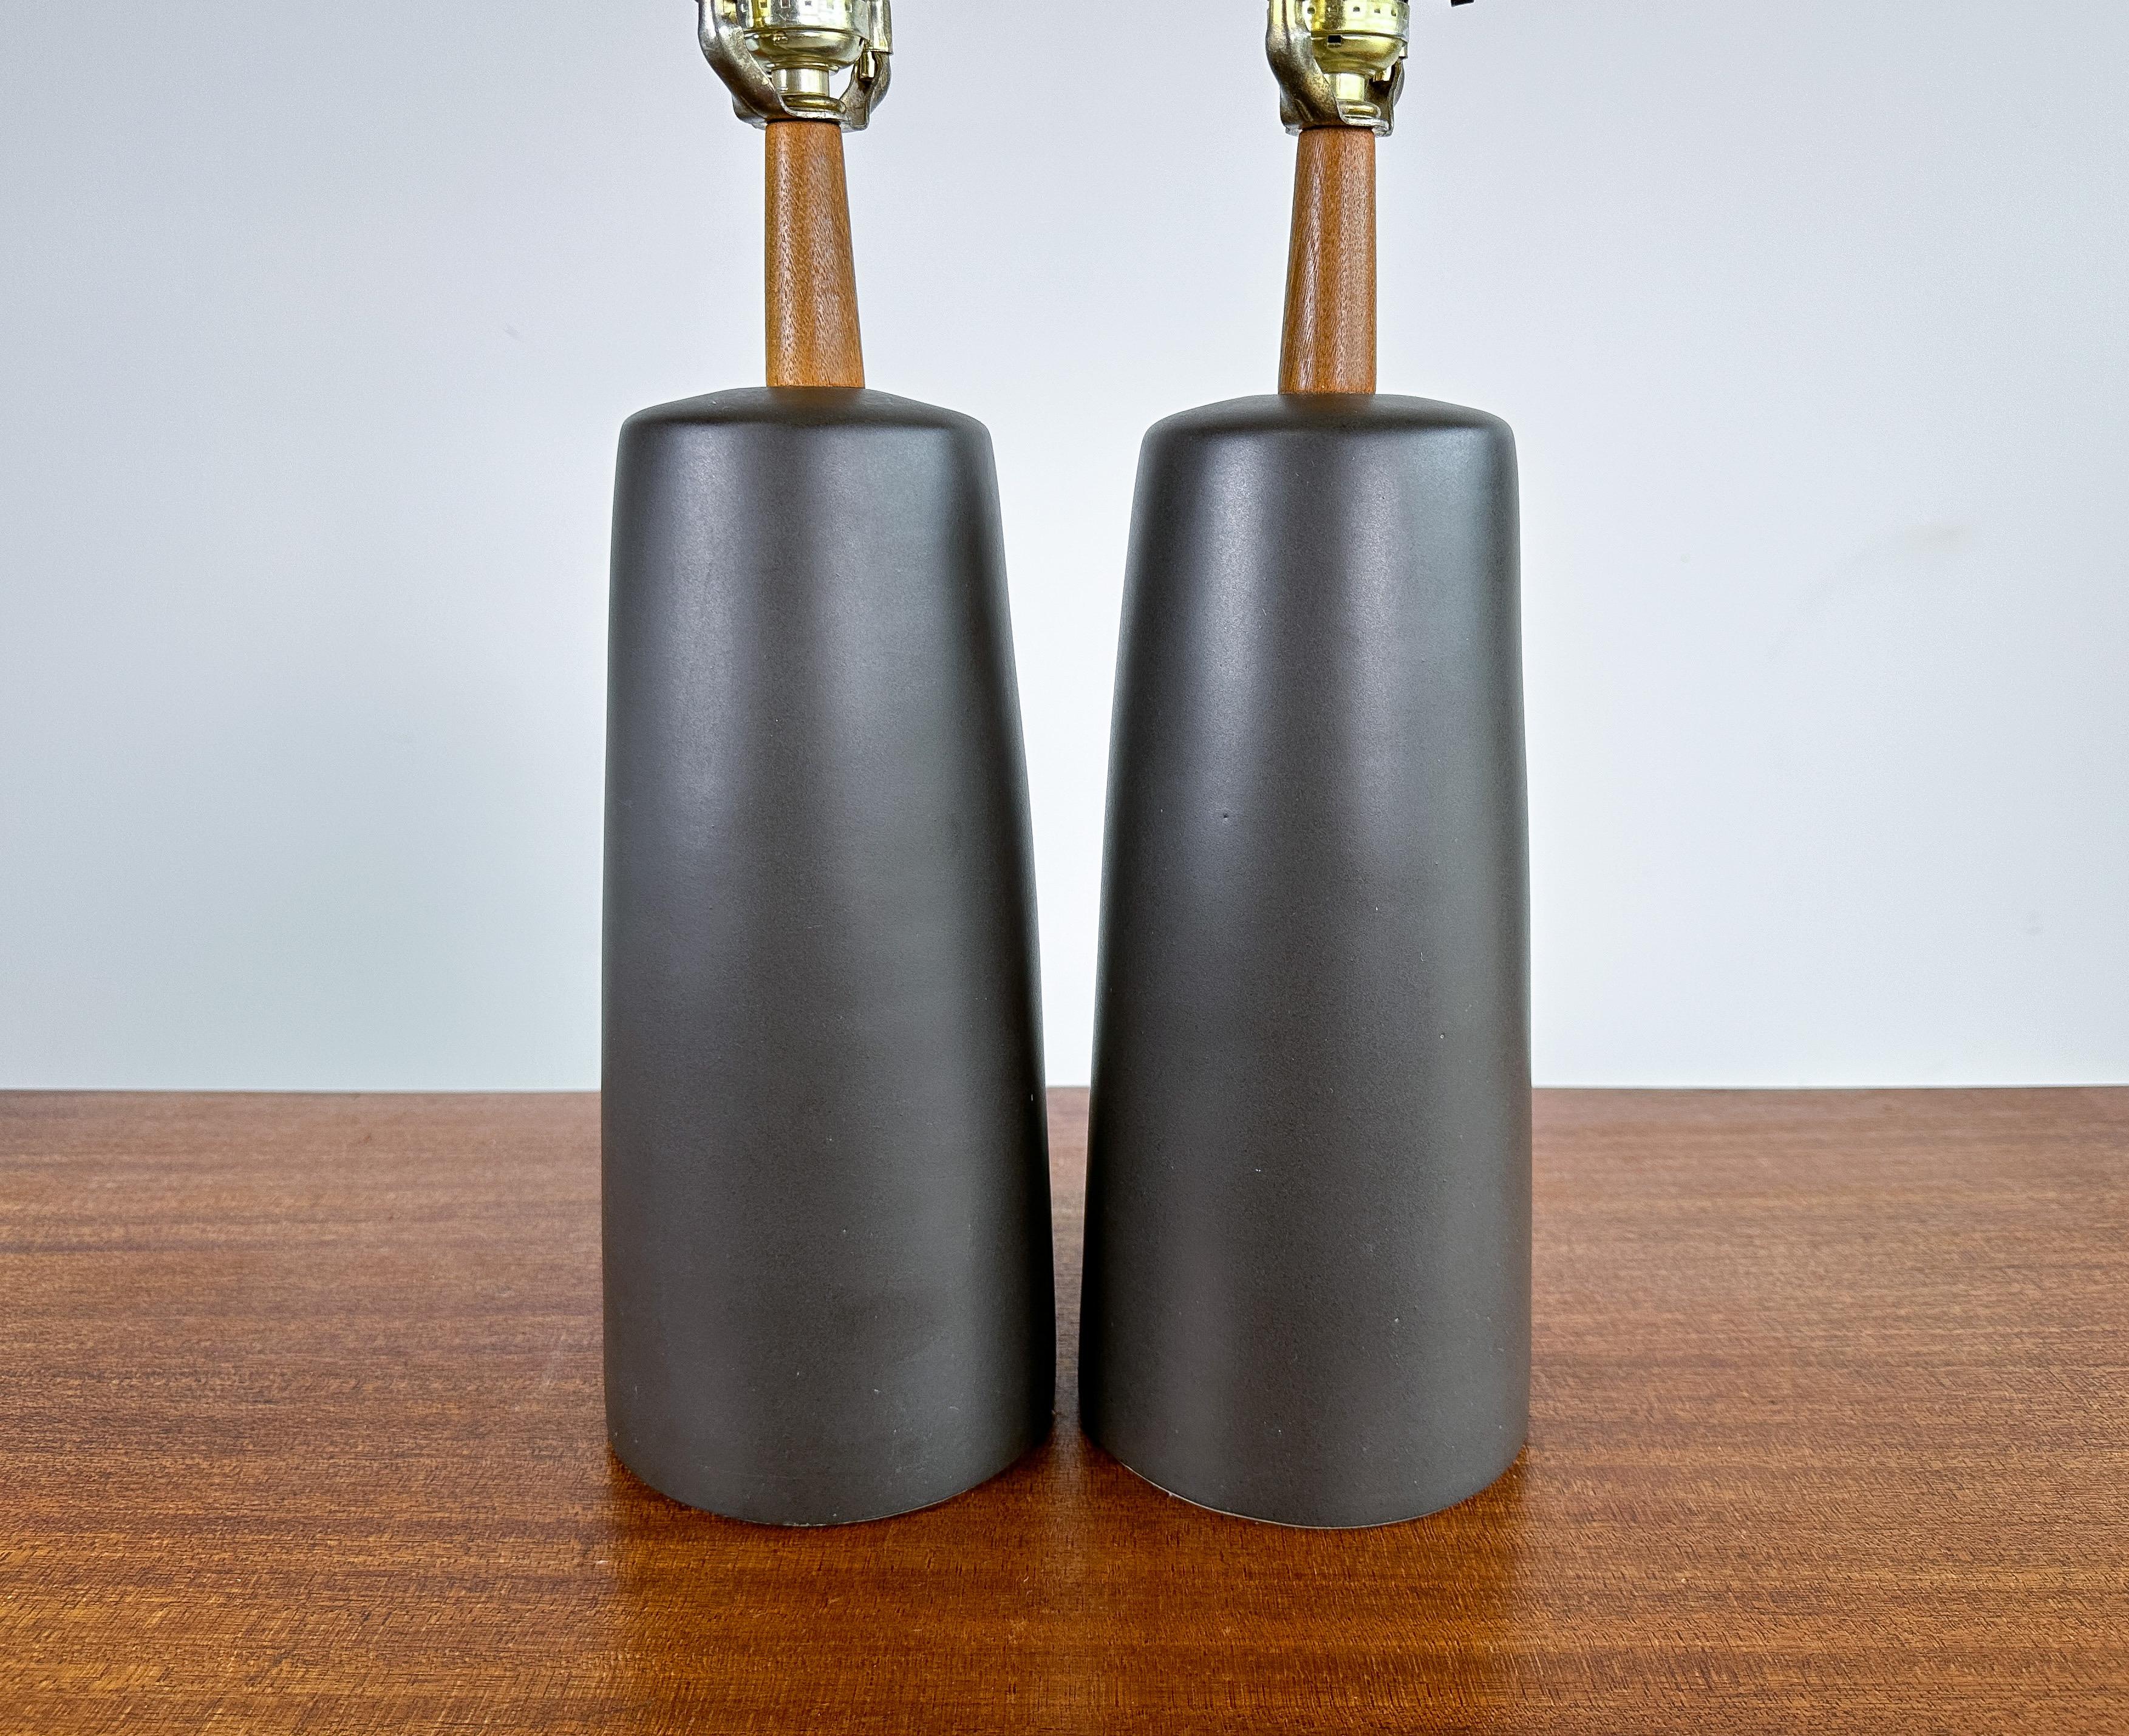 Martz Glazed Ceramic Table Lamps, Marshall Studios, 1960s, a Pair In Good Condition For Sale In Round Rock, TX